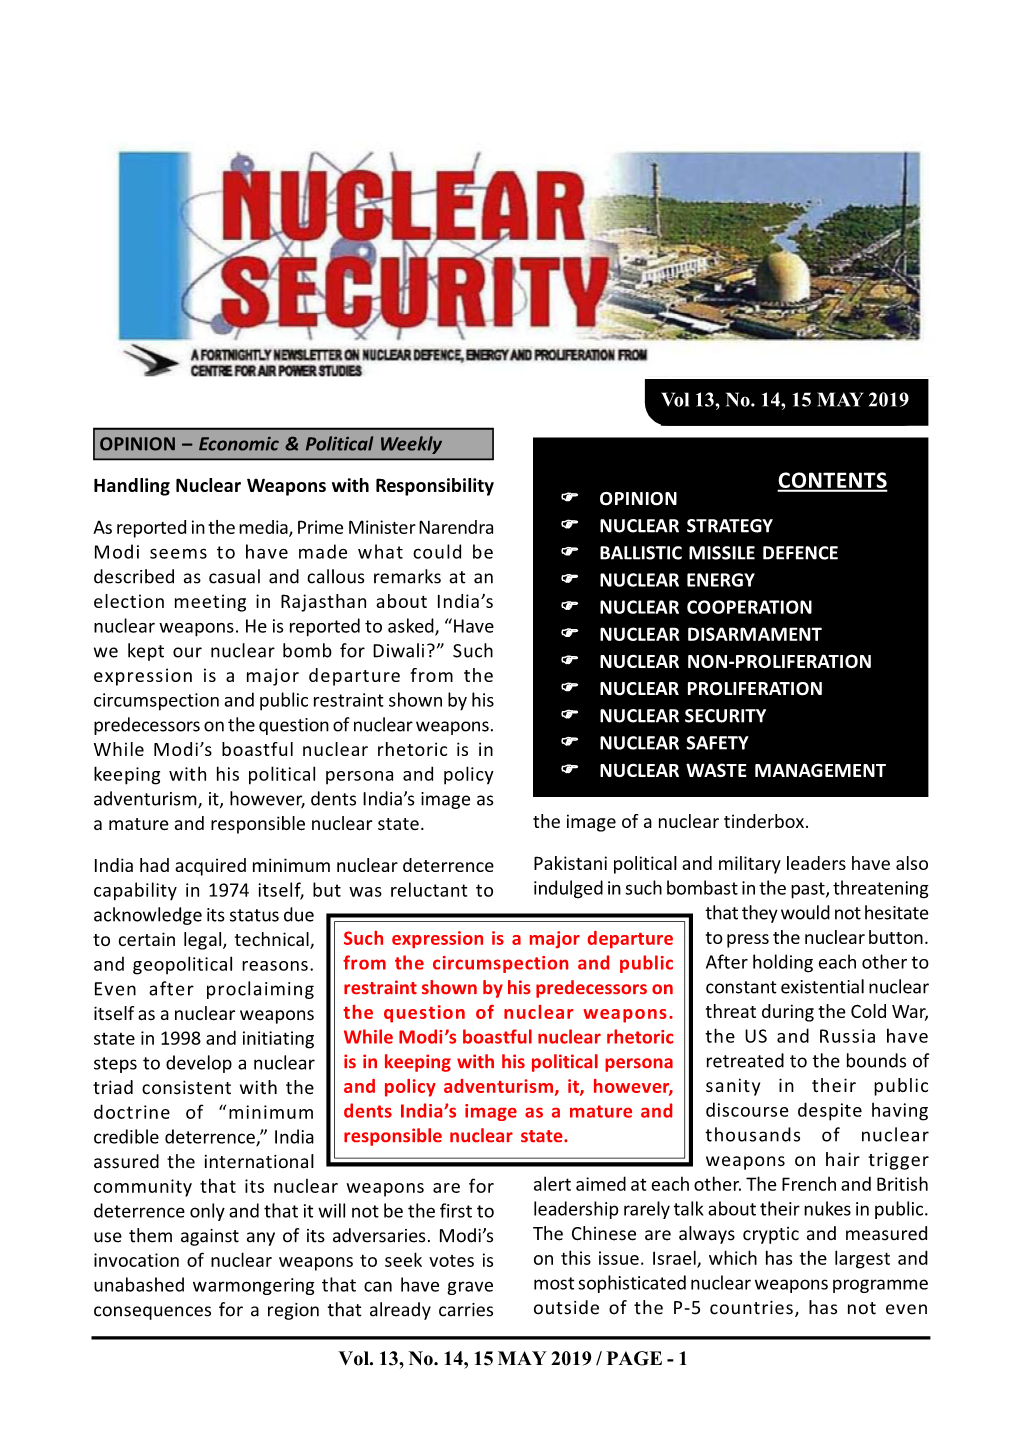 Nuclear Security Vol 13, No. 14, 15 May 2019